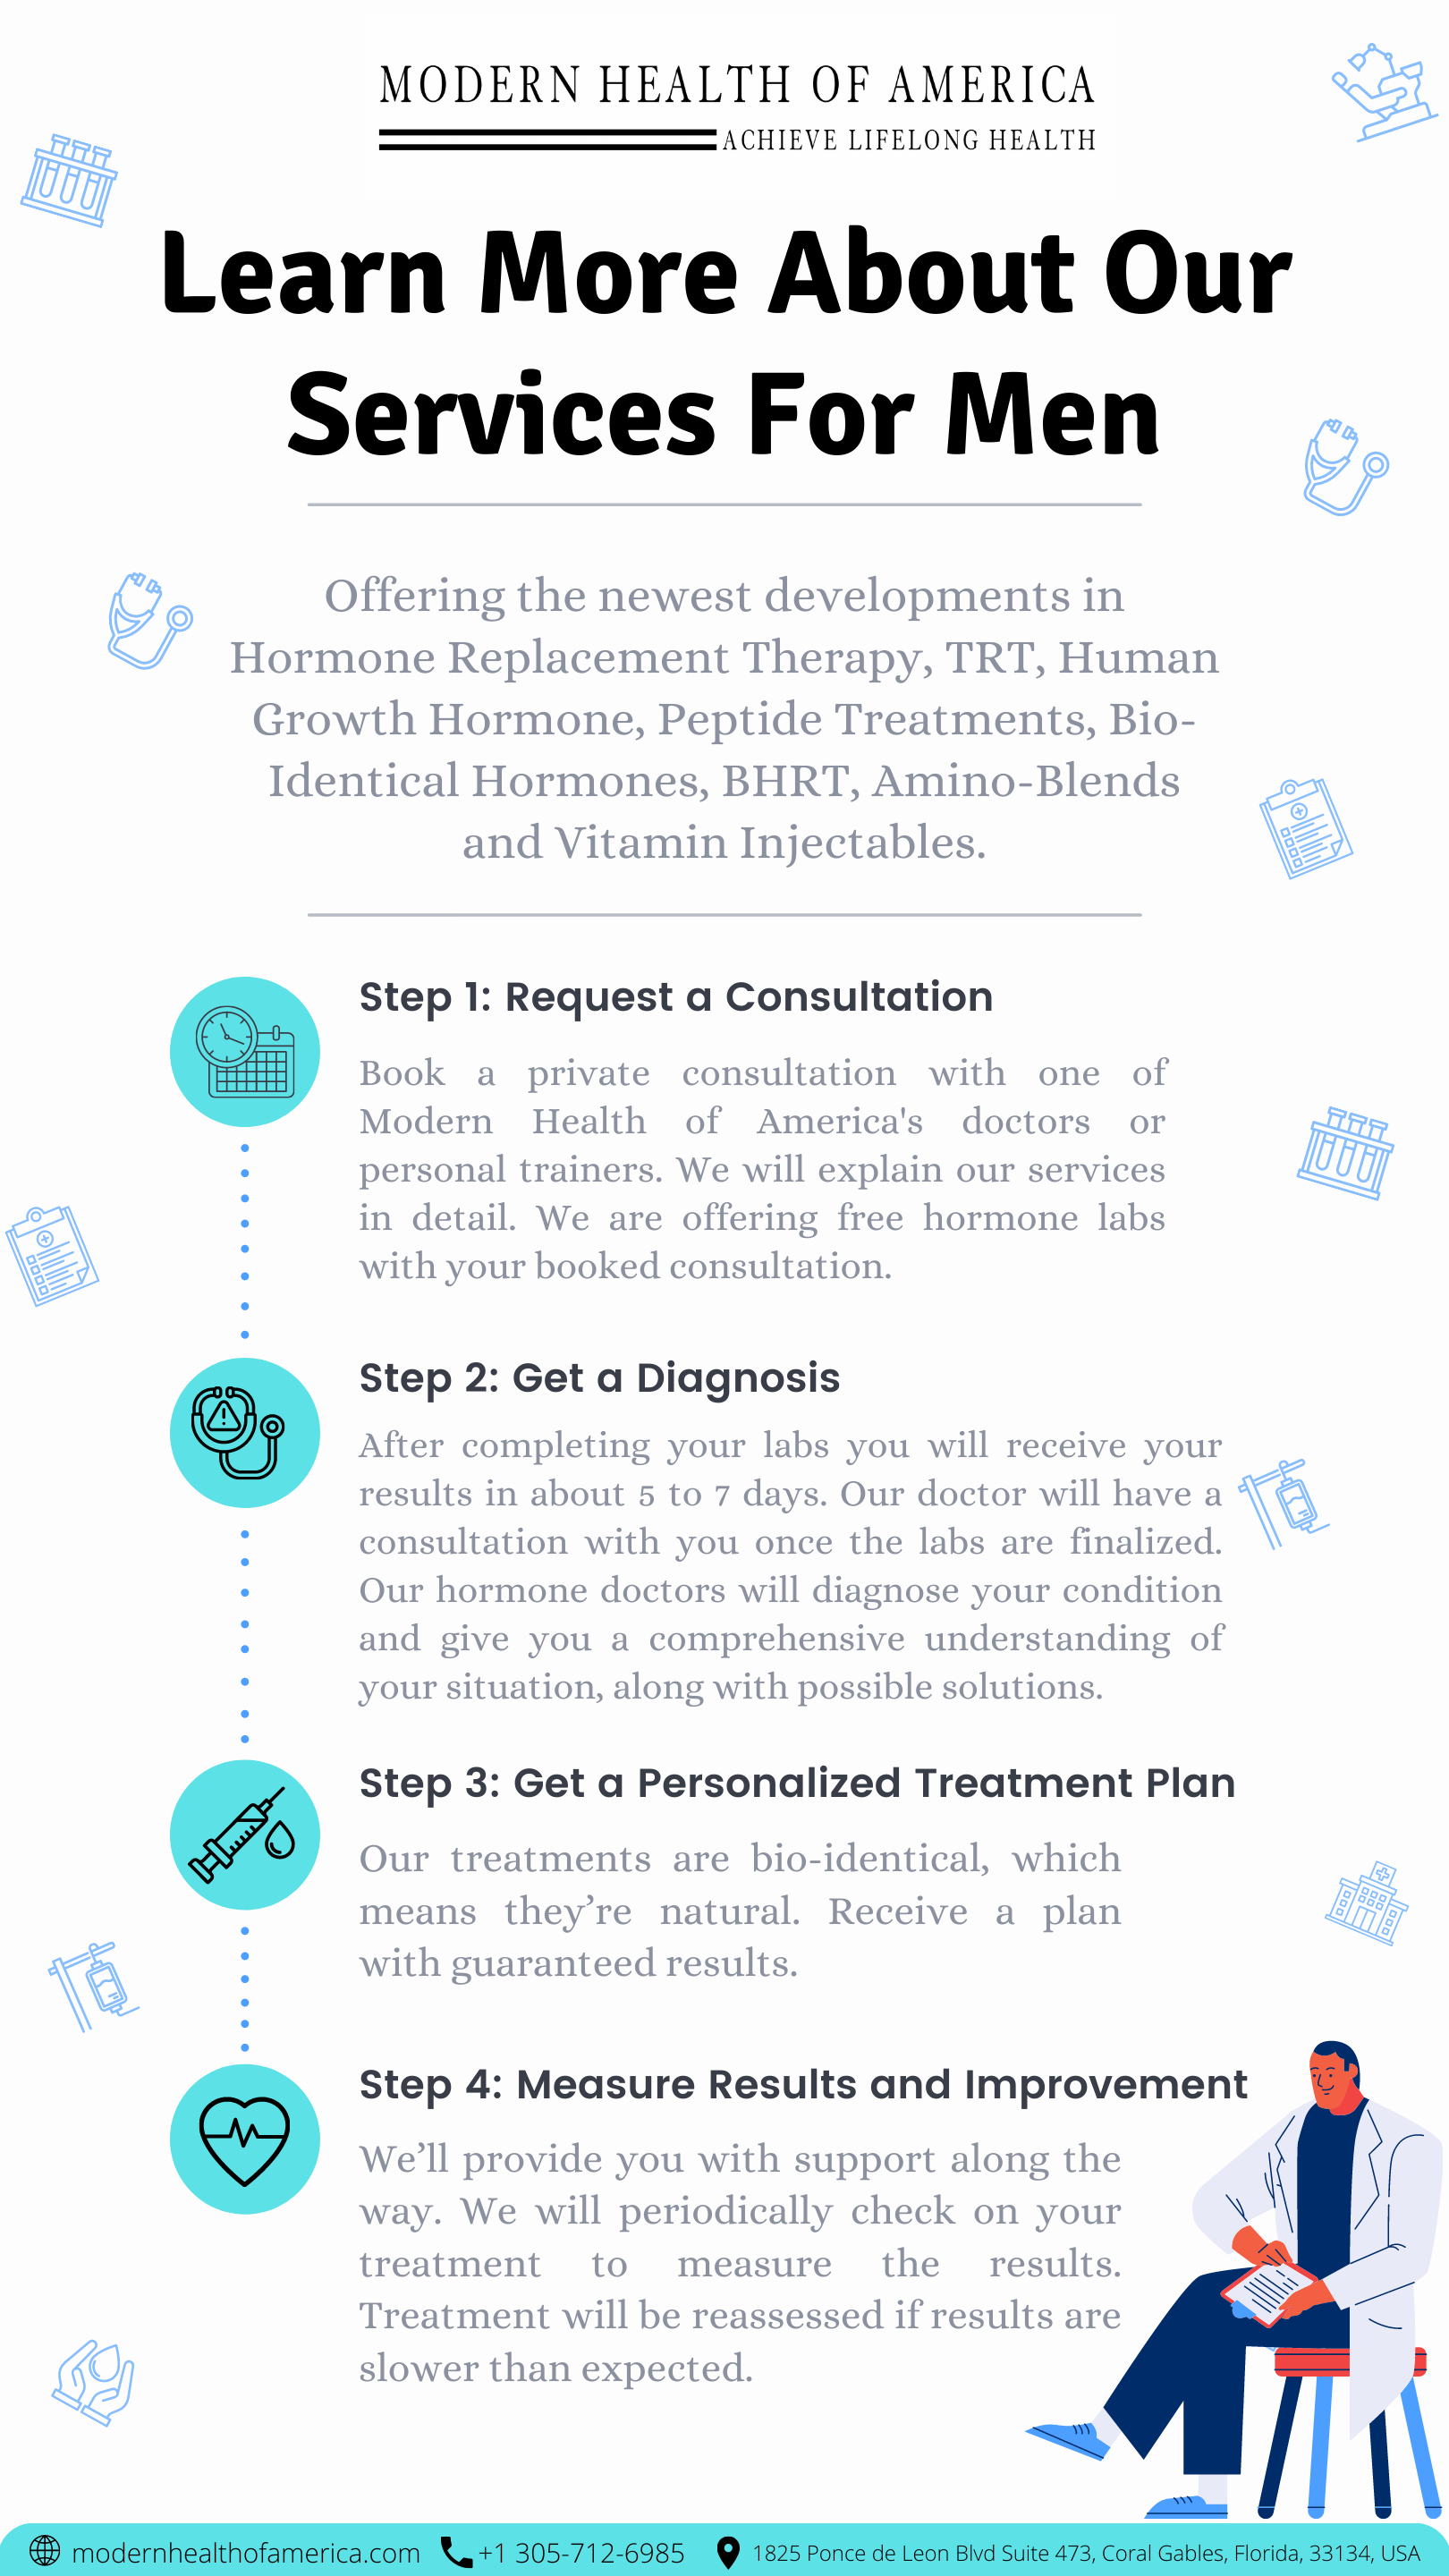 Do You Want Hormone Replacement Therapy For Men & Want To Learn More About Services For Men